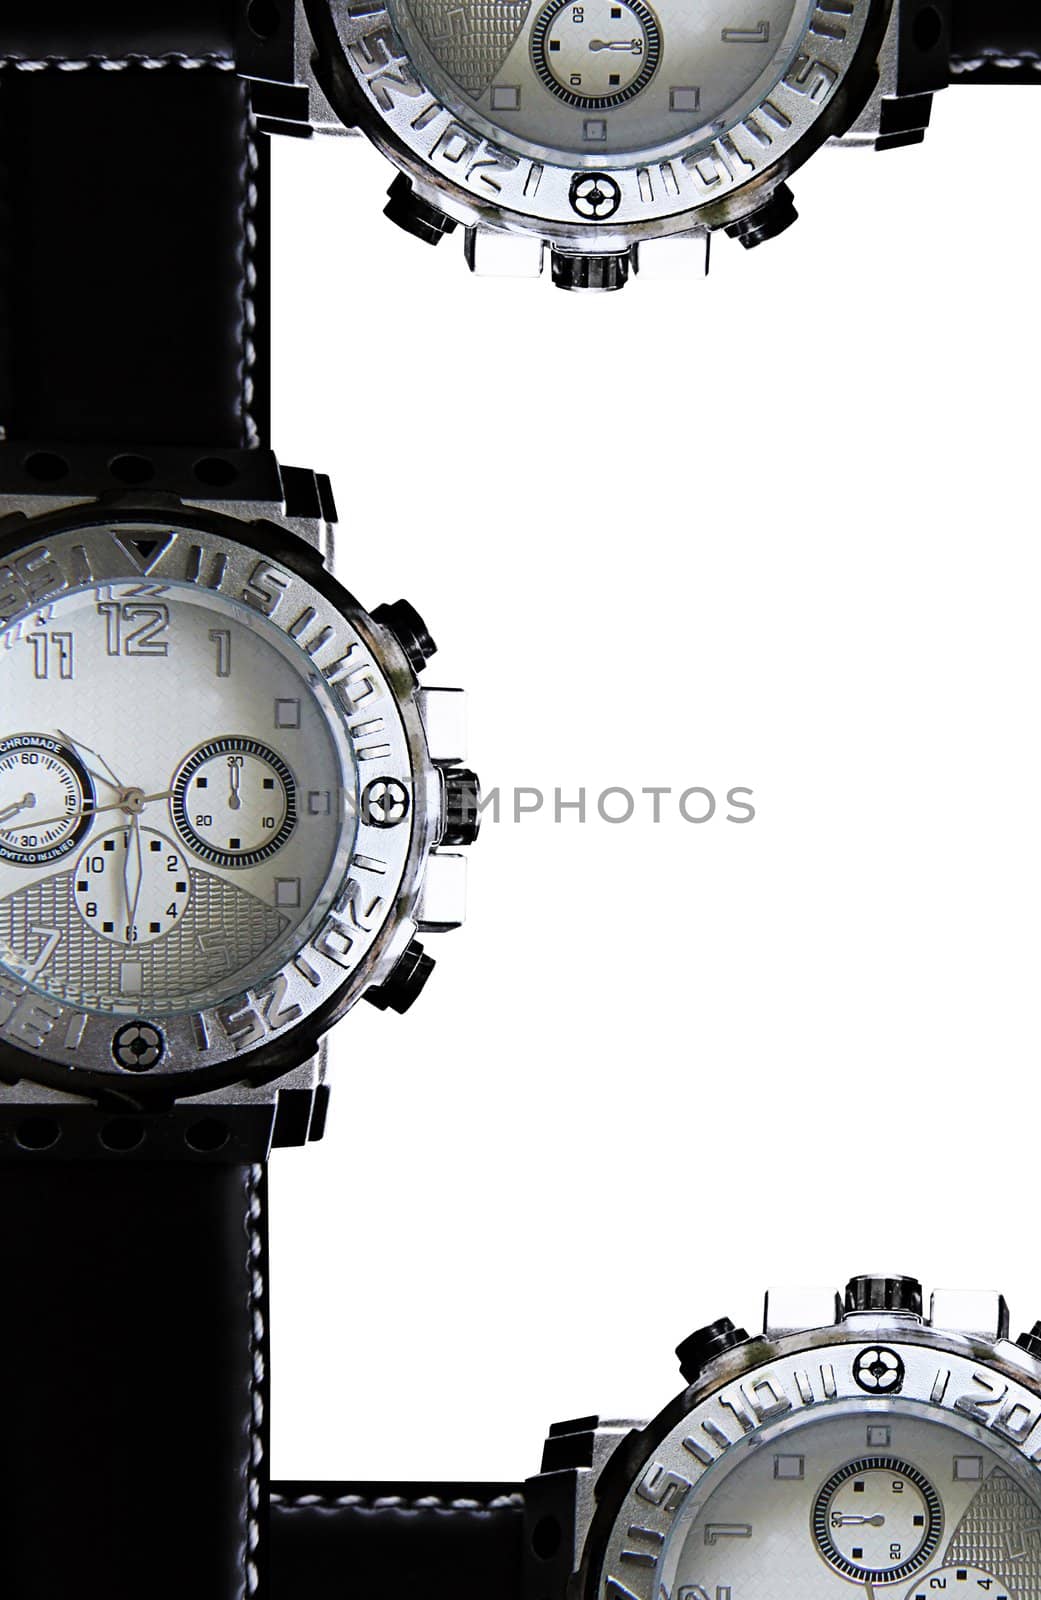 the silver chronograph time luxury equipment